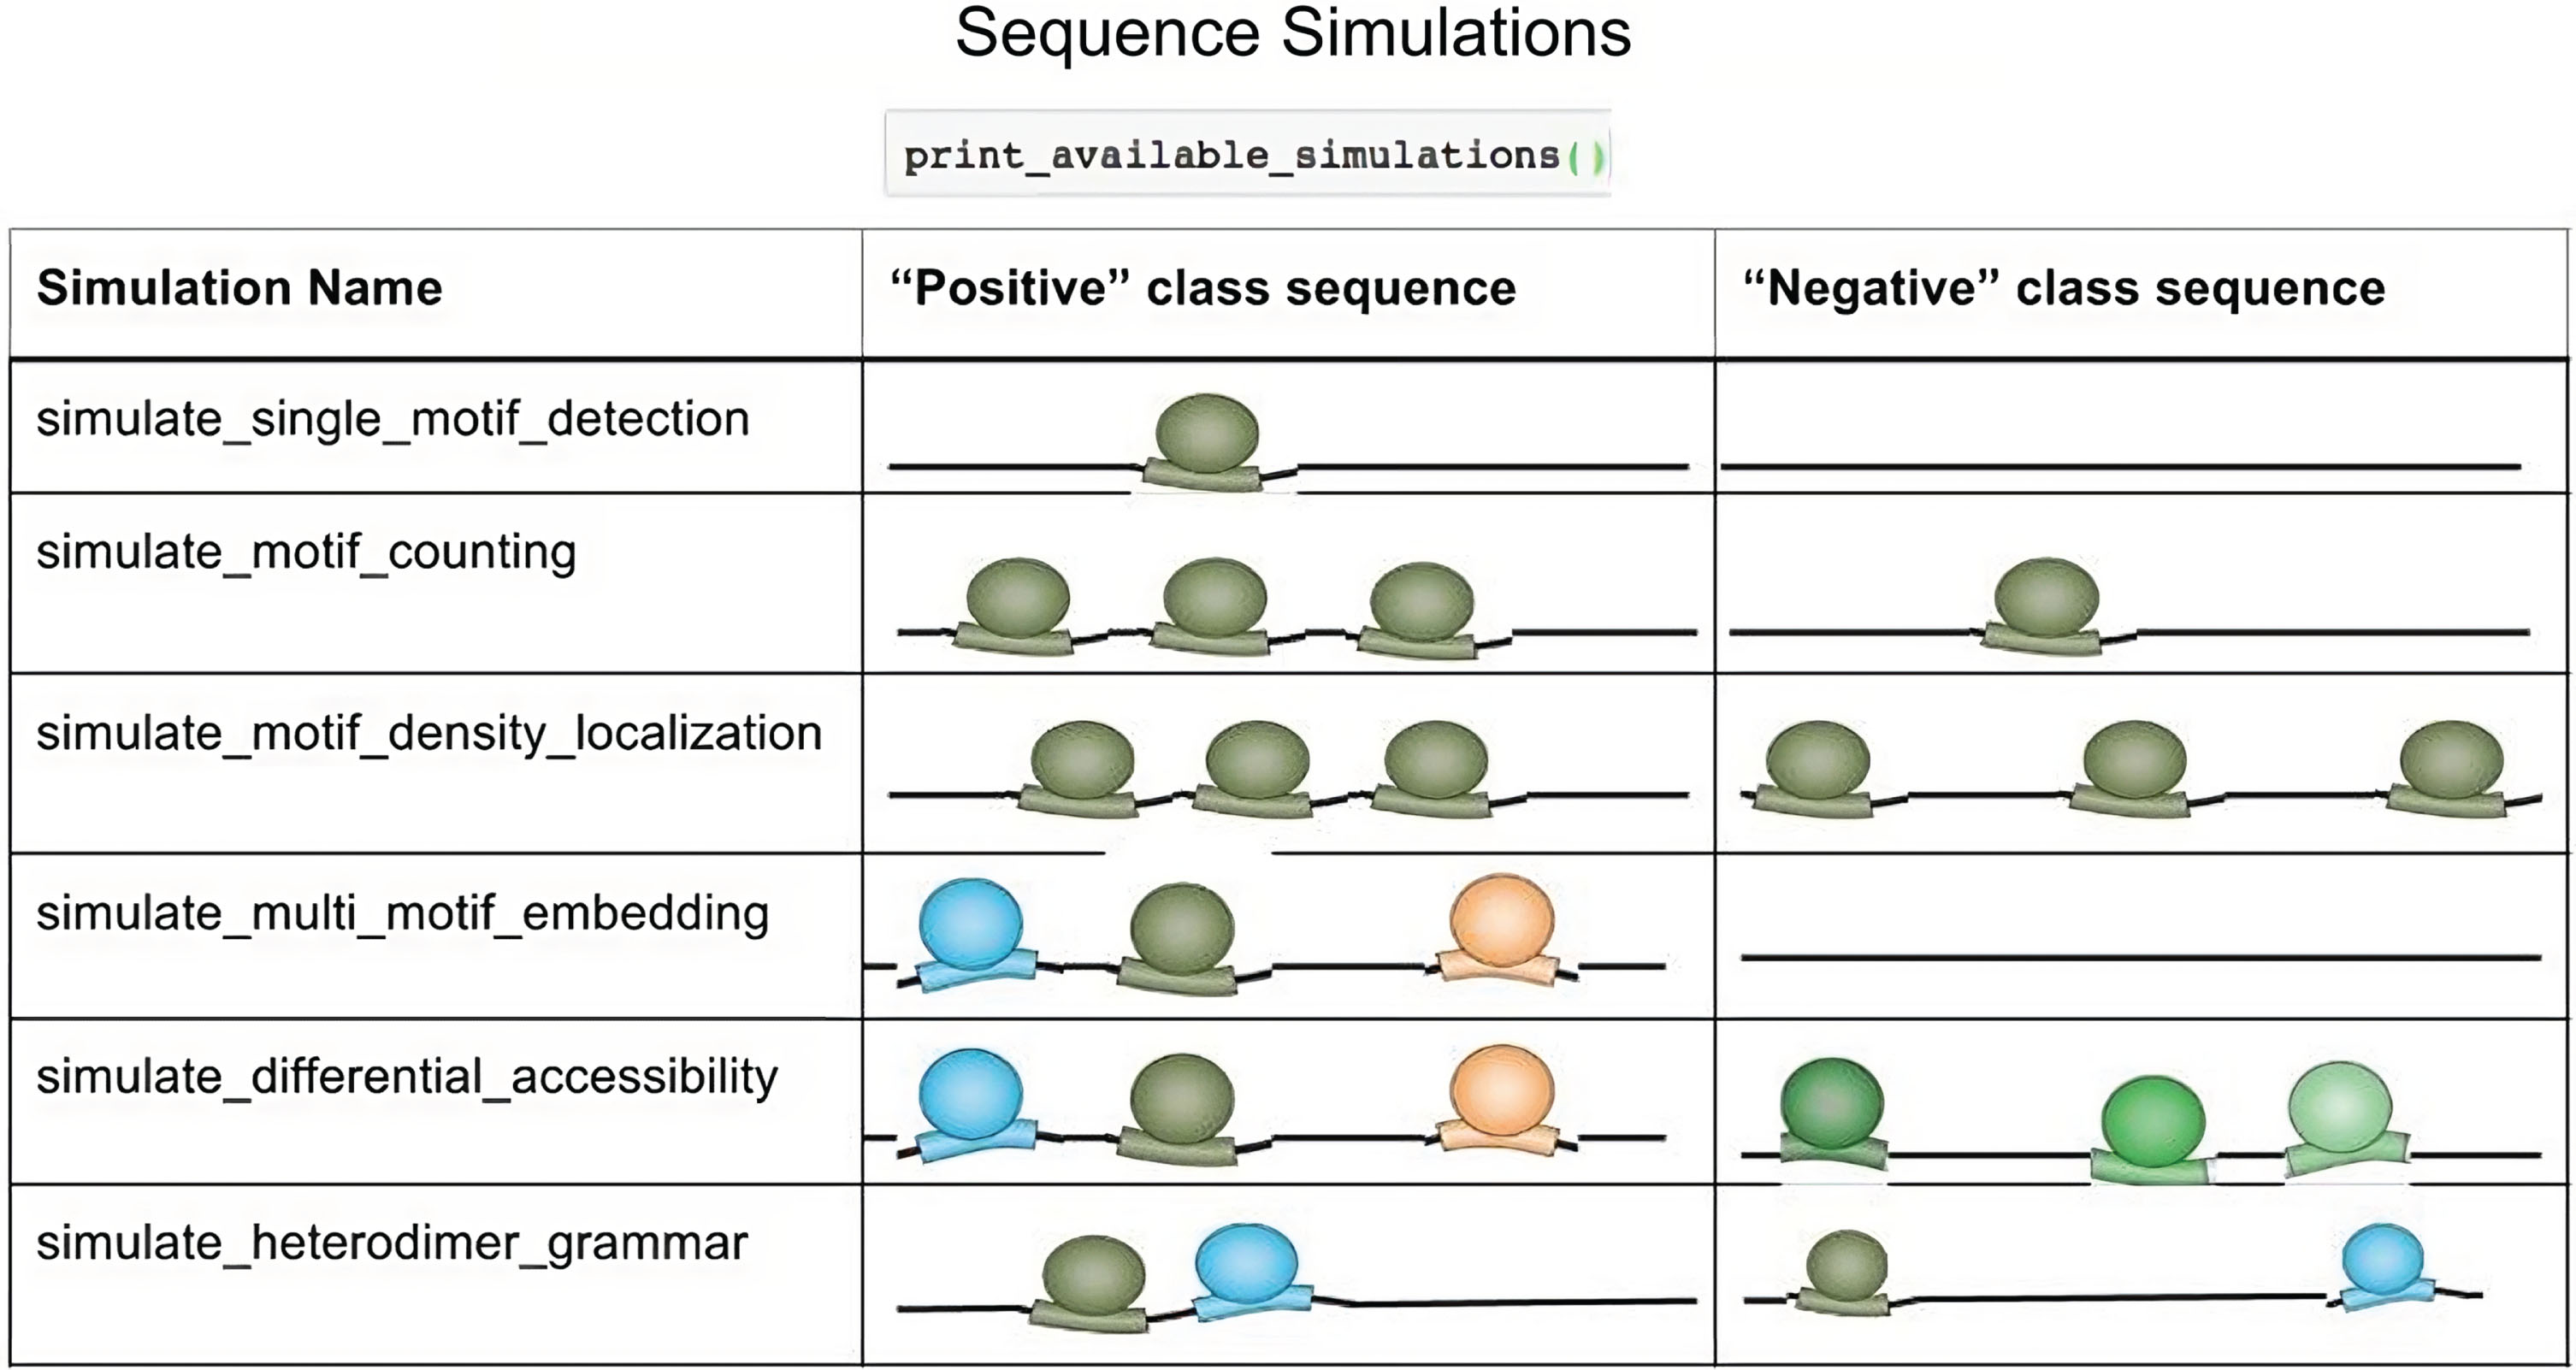 Significant sequence simulations.